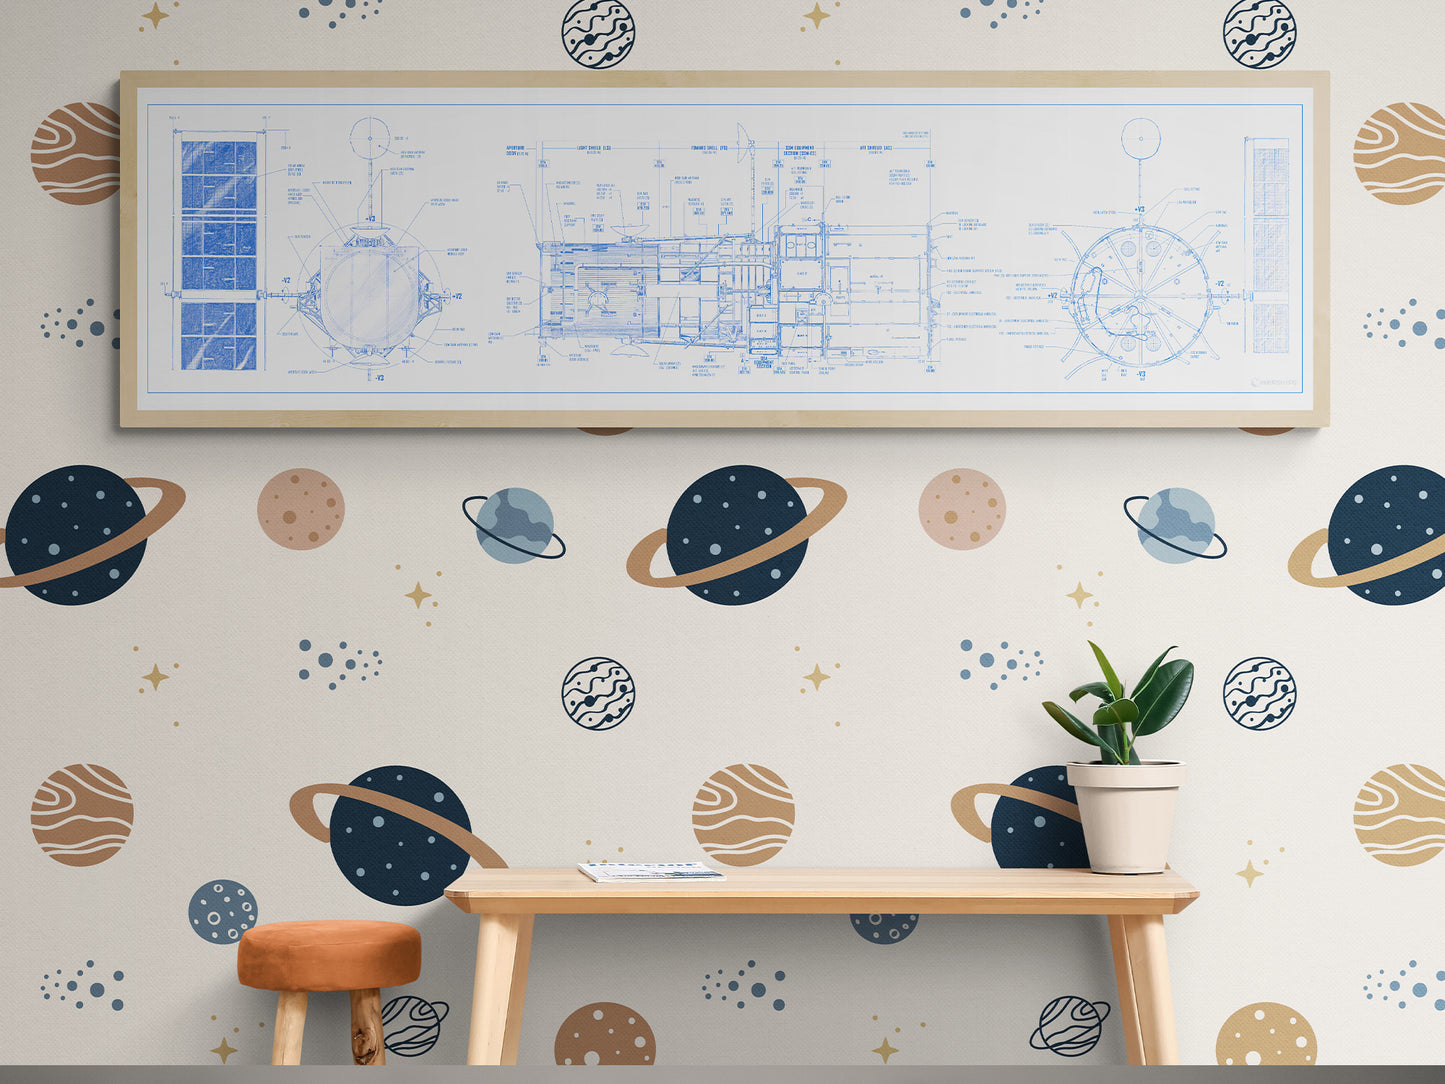 Hubble Space Telescope Blueprint | Rocket Blueprint Posters | The image shows a kids' playroom with a white-framed Hubble Space Telescope blueprint hanging on a space-themed wallpapered wall. The wallpaper is decorated with various planets and stars. Below, a light wood desk and an orange stool create a playful study area with a small plant adding a touch of greenery.